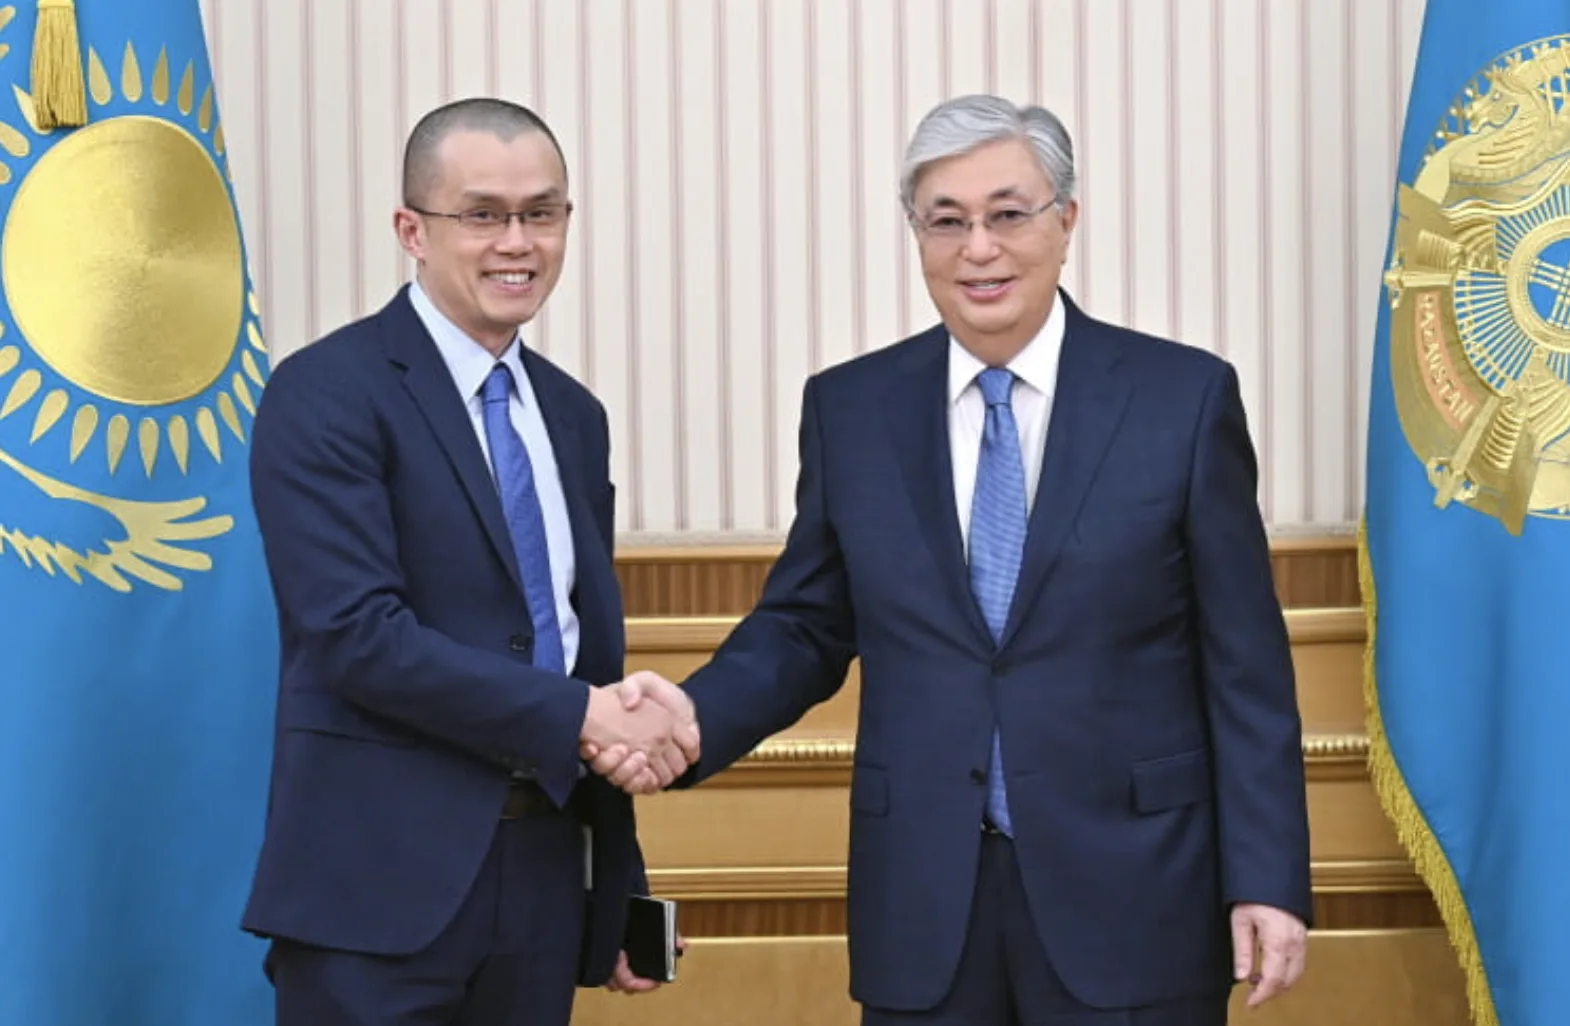 Changpeng Zhao and Kassym-Jomart Tokayev shaking hands at MoU agreement. 